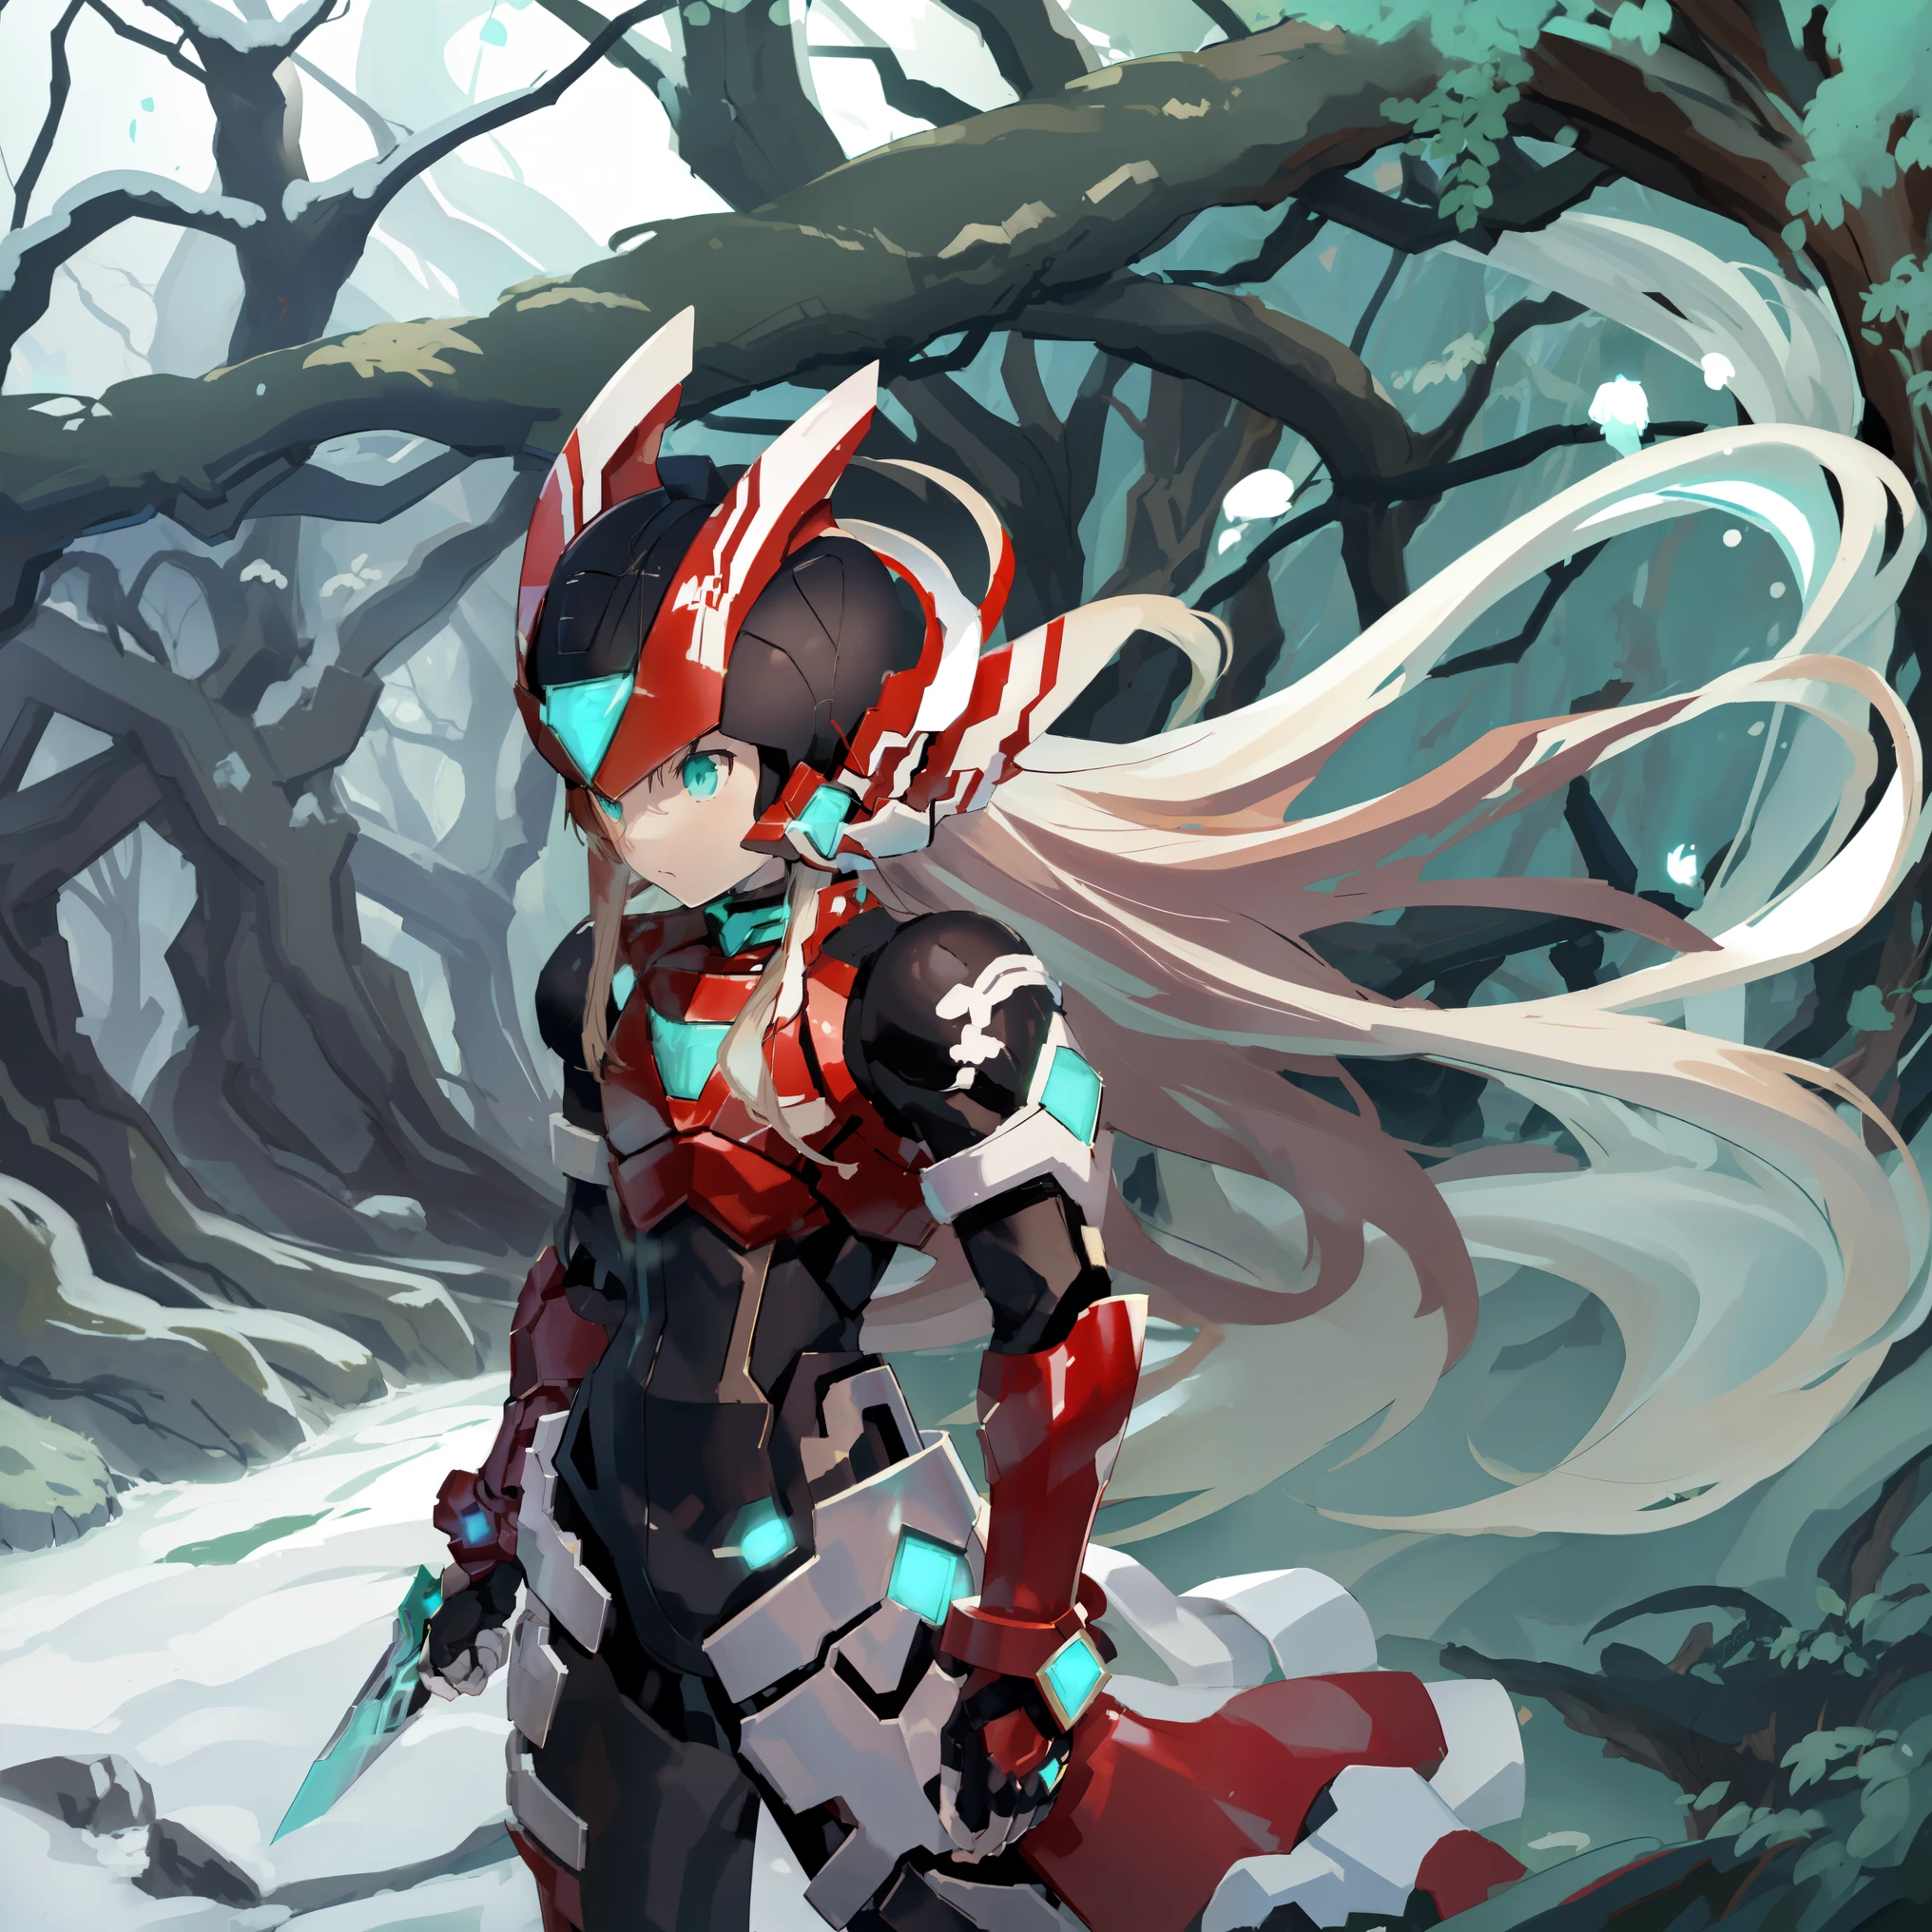 megzeromyth2023, 1boy, long white hair, red armor, green energy sword, high quality, masterpiece, in a dark forest looking out at a waterfall, in the style of ultra detailed, dark cyan and light bronze, eye-catching tags, physically based rendering, depictions of inclement weather, heavy shading, landscape inspirations